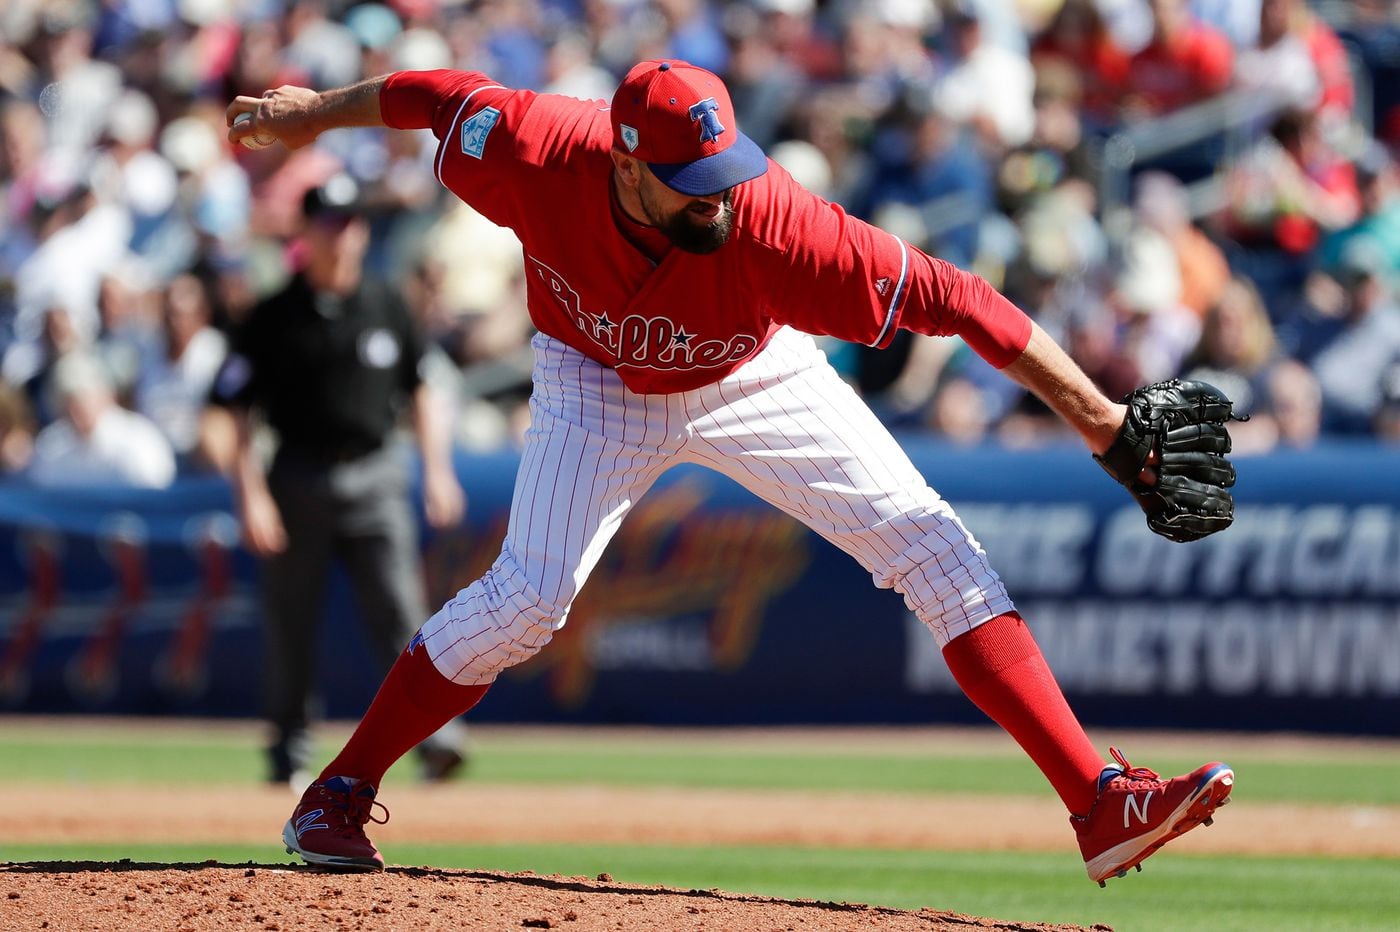 MLB introduces rule changes, setting minimums for pitchers and